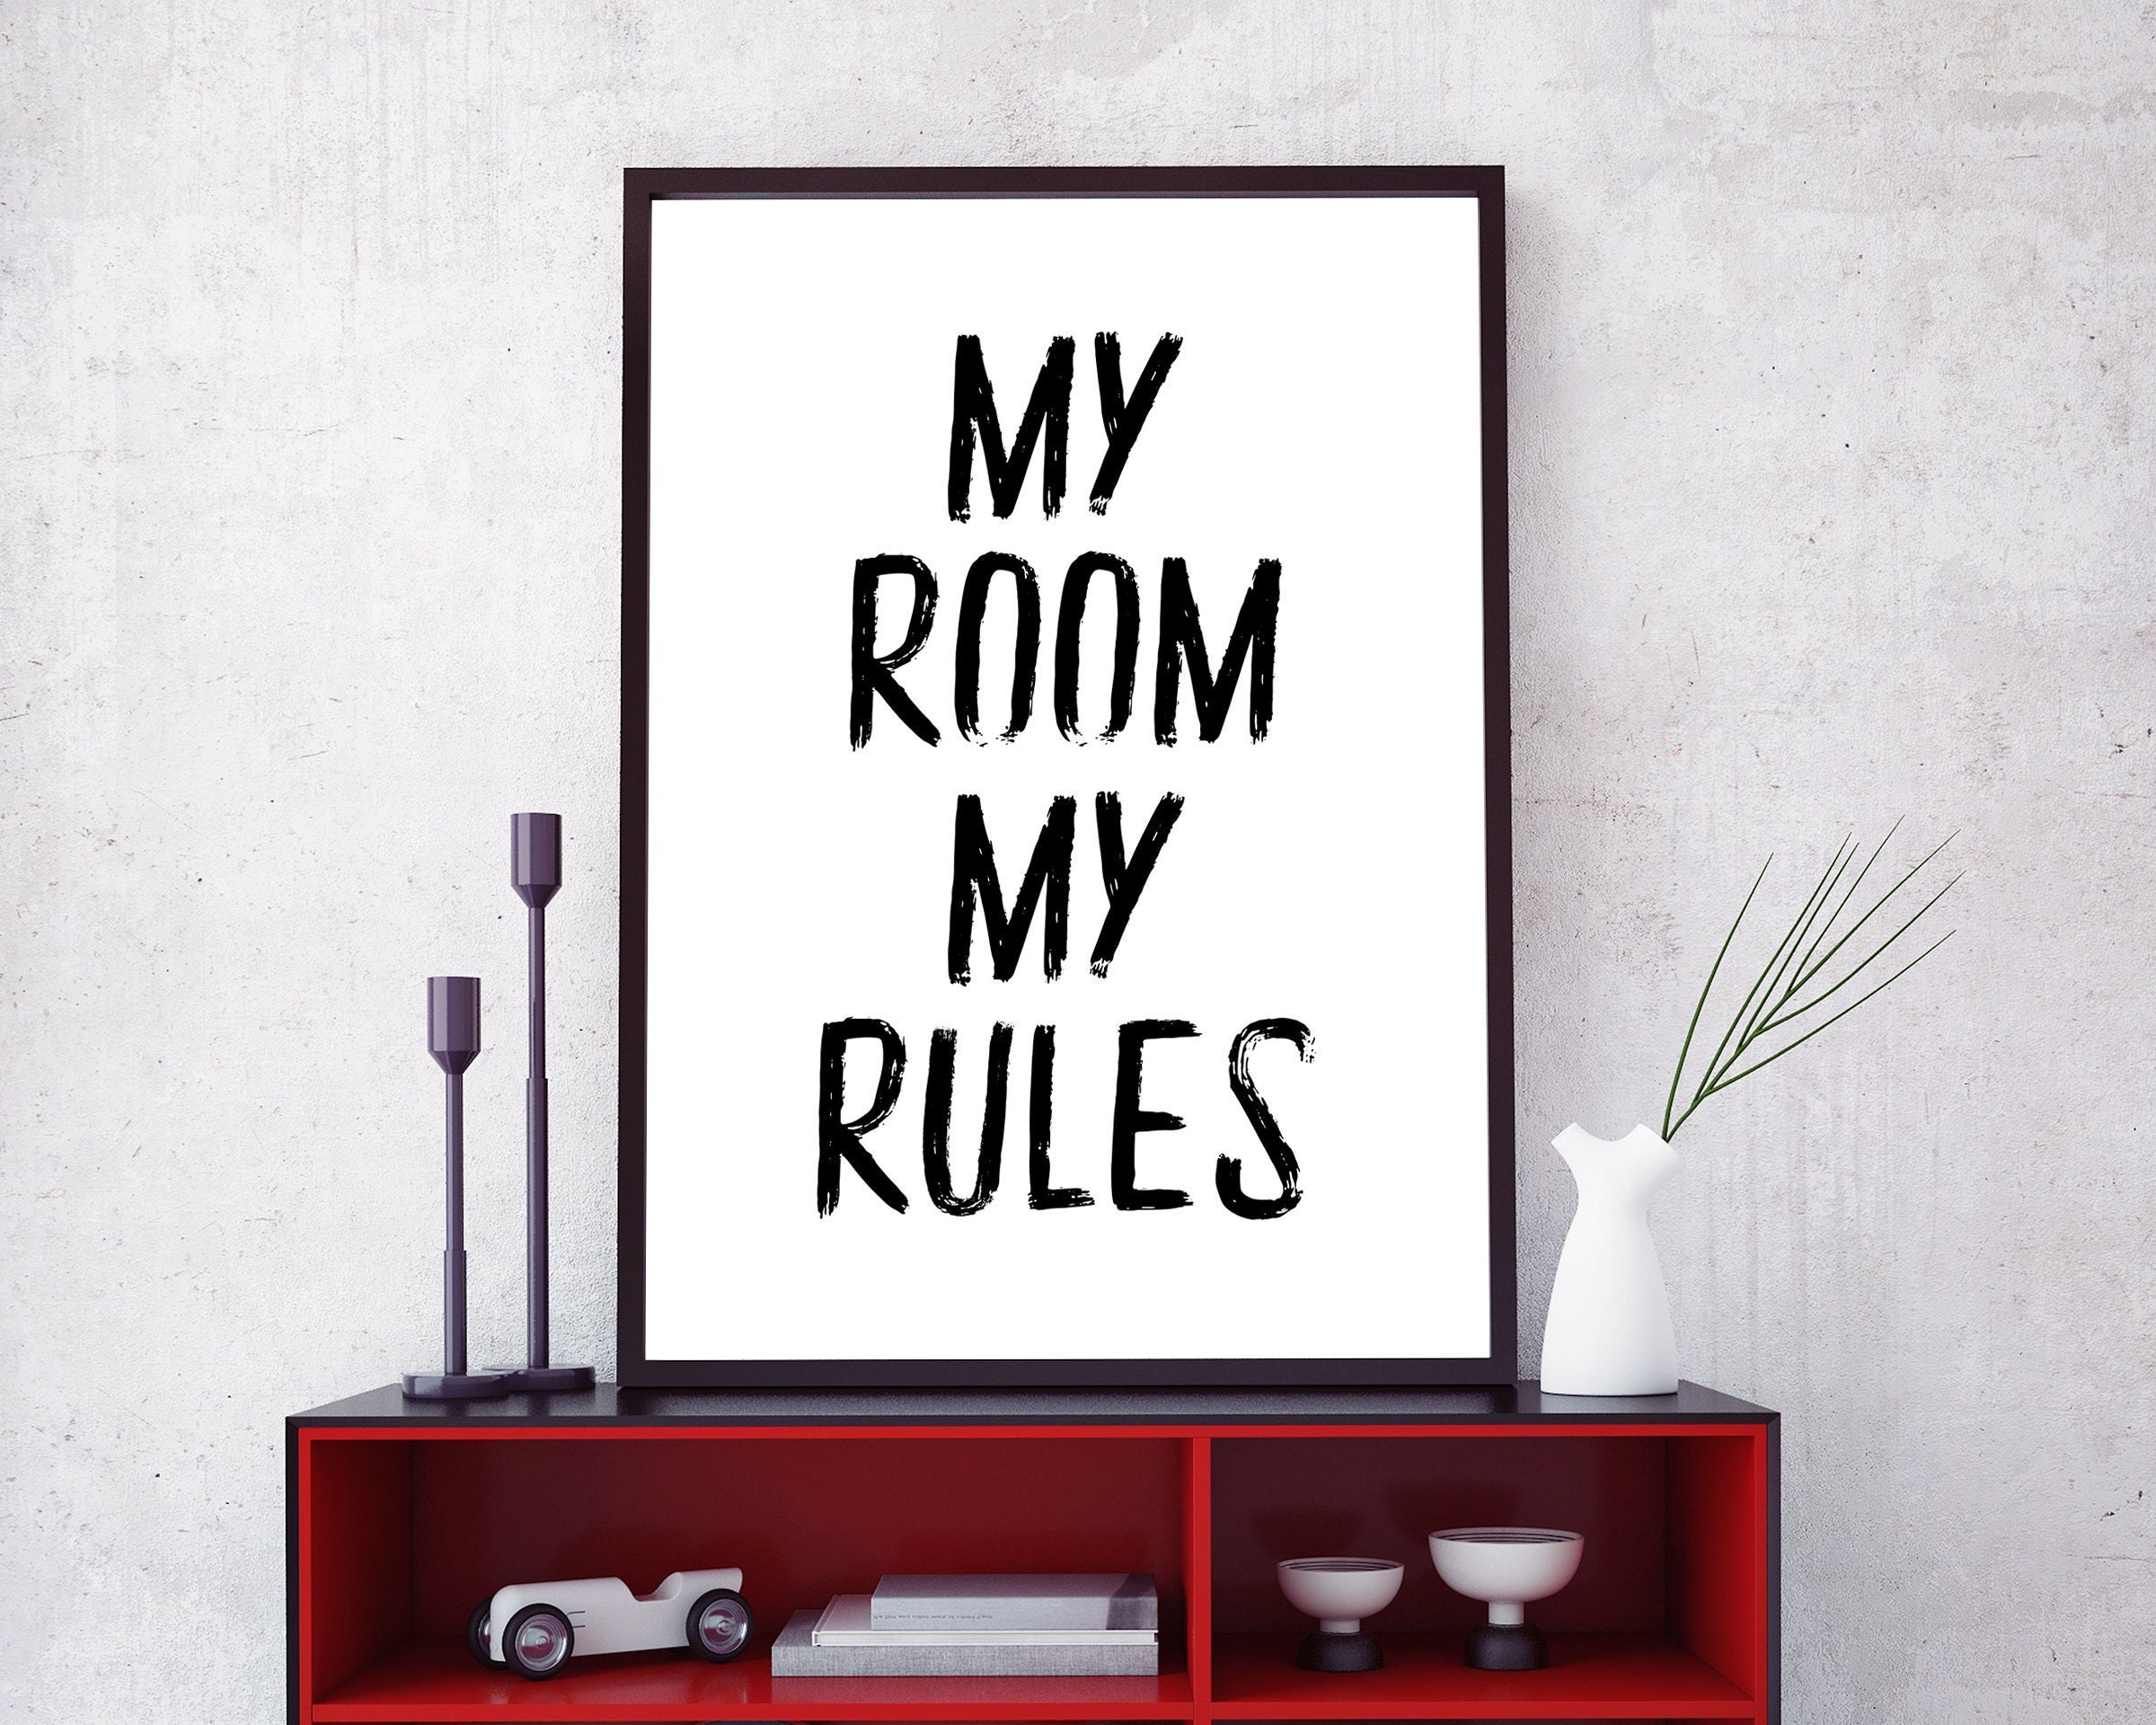 Its a room. My Room Rules. My Room my Rules. My Bedroom Rules. Rules for my Room.